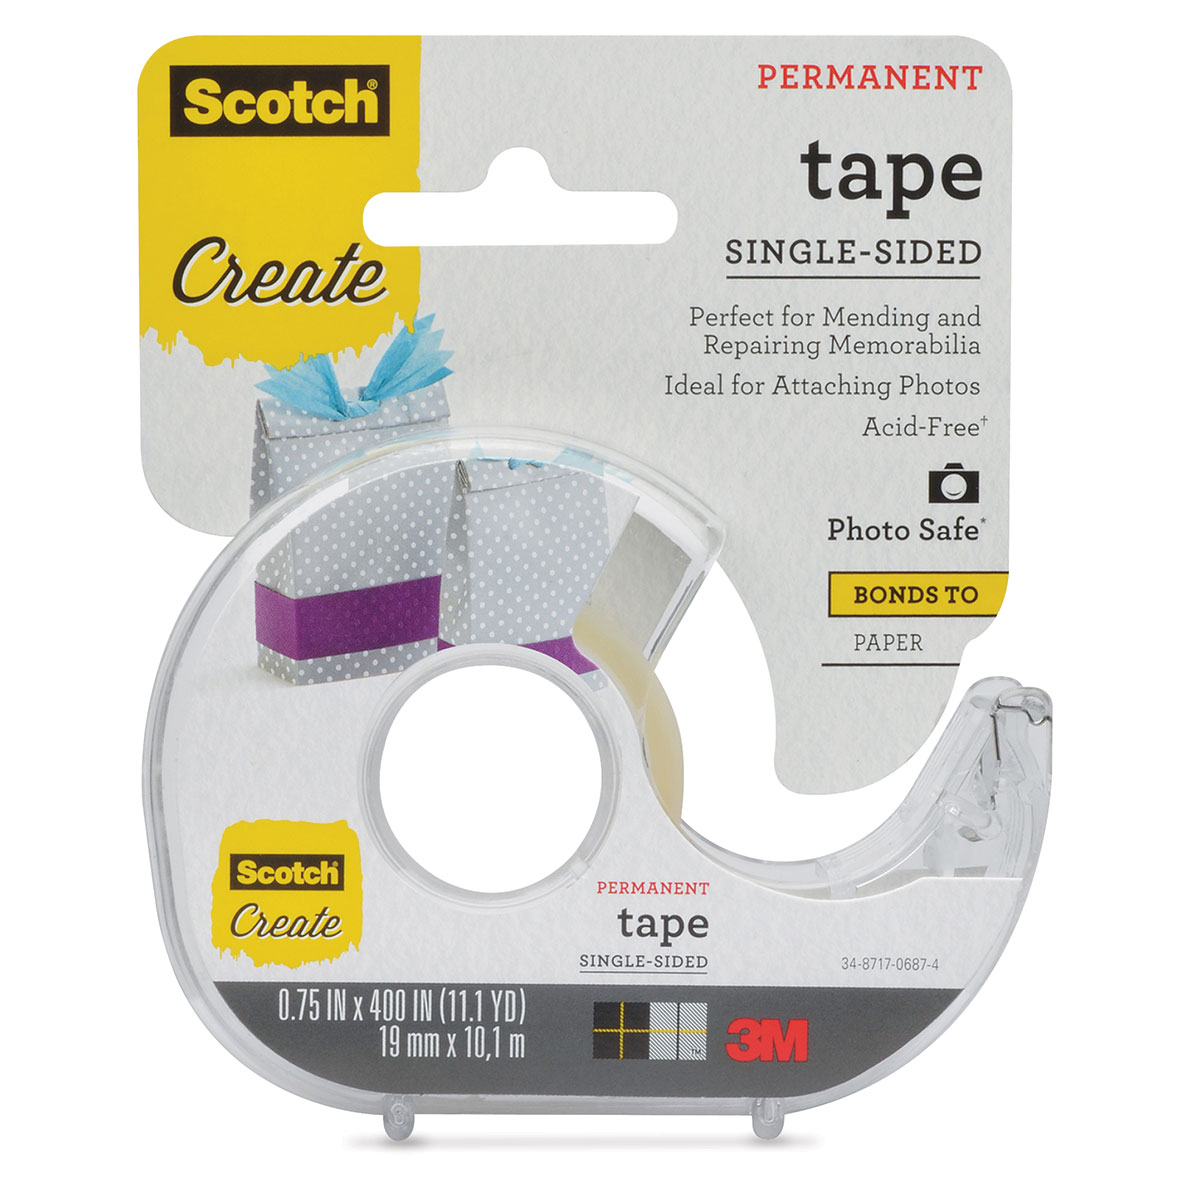  Scotch Double Sided Tape, Removable, 1/2 in x 300 in